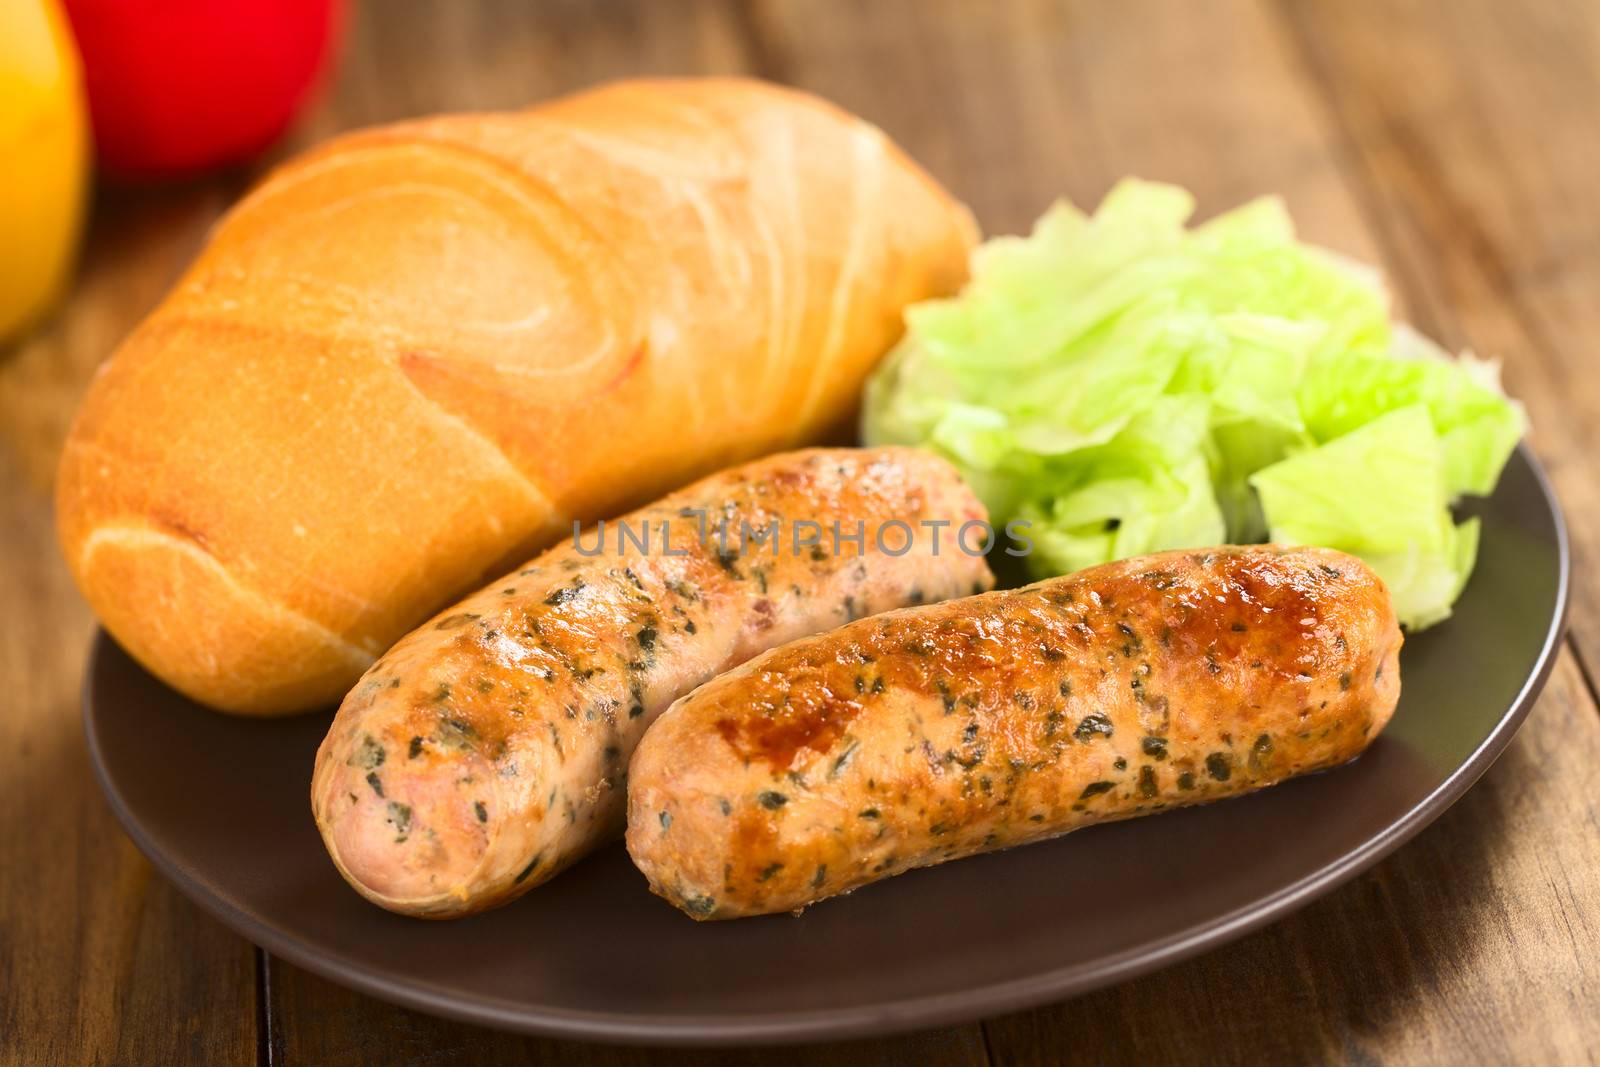 Fried bratwurst with bun, traditional German fast food served on plate with green salad (Selective Focus, Focus on the right side of the right bratwurst)